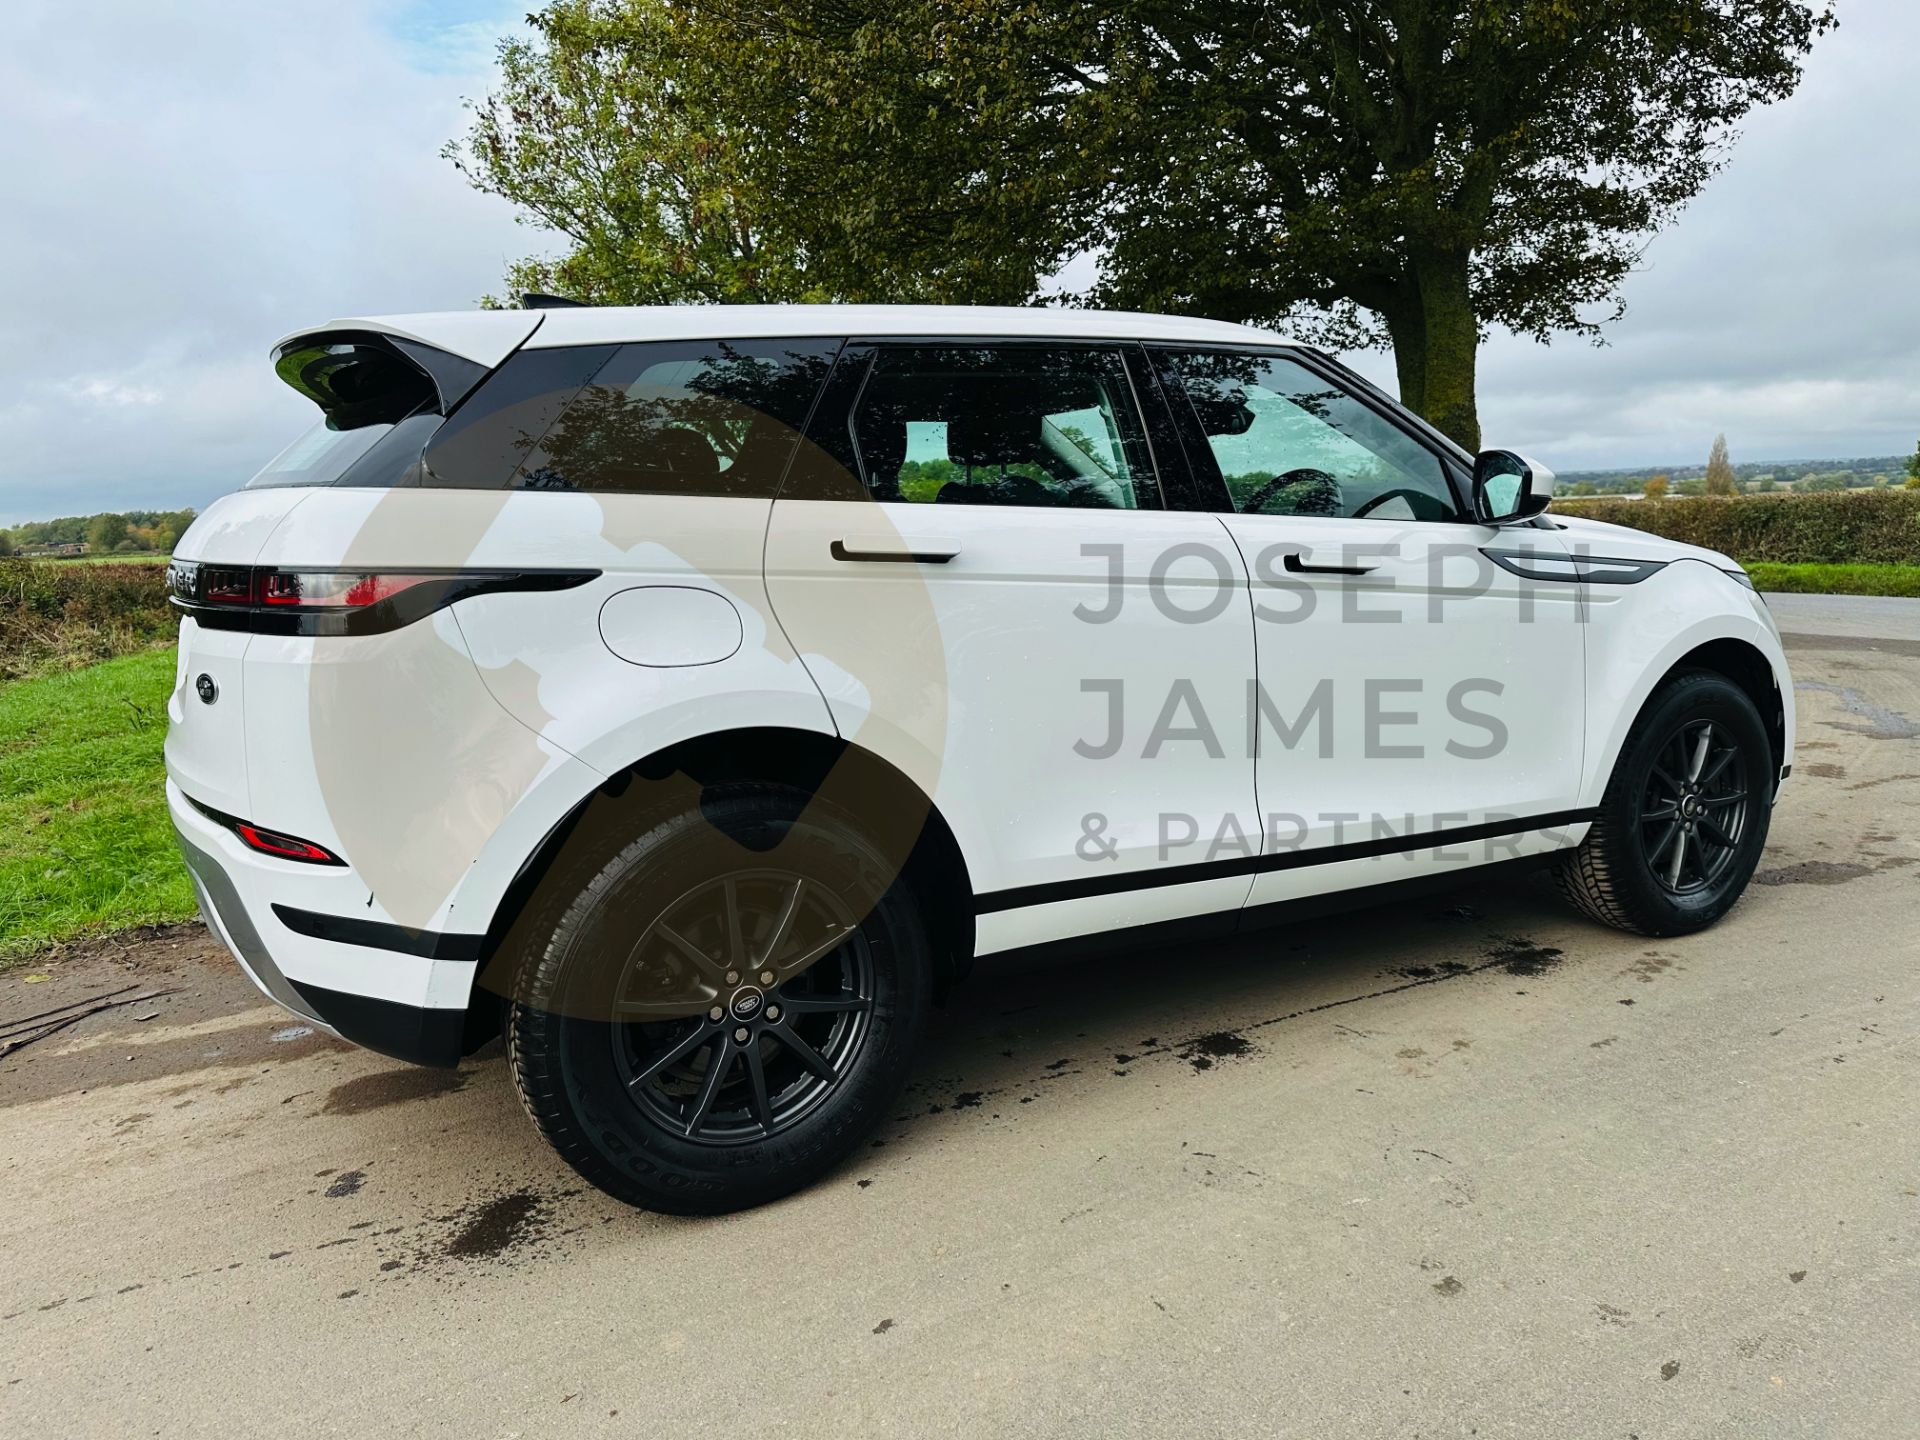 (ON SALE) LAND ROVER RANGE ROVER EVOQUE 2.0d AUTO-START STOP (2020 MODEL) ONLY 33K MILES FROM NEW - Image 15 of 41